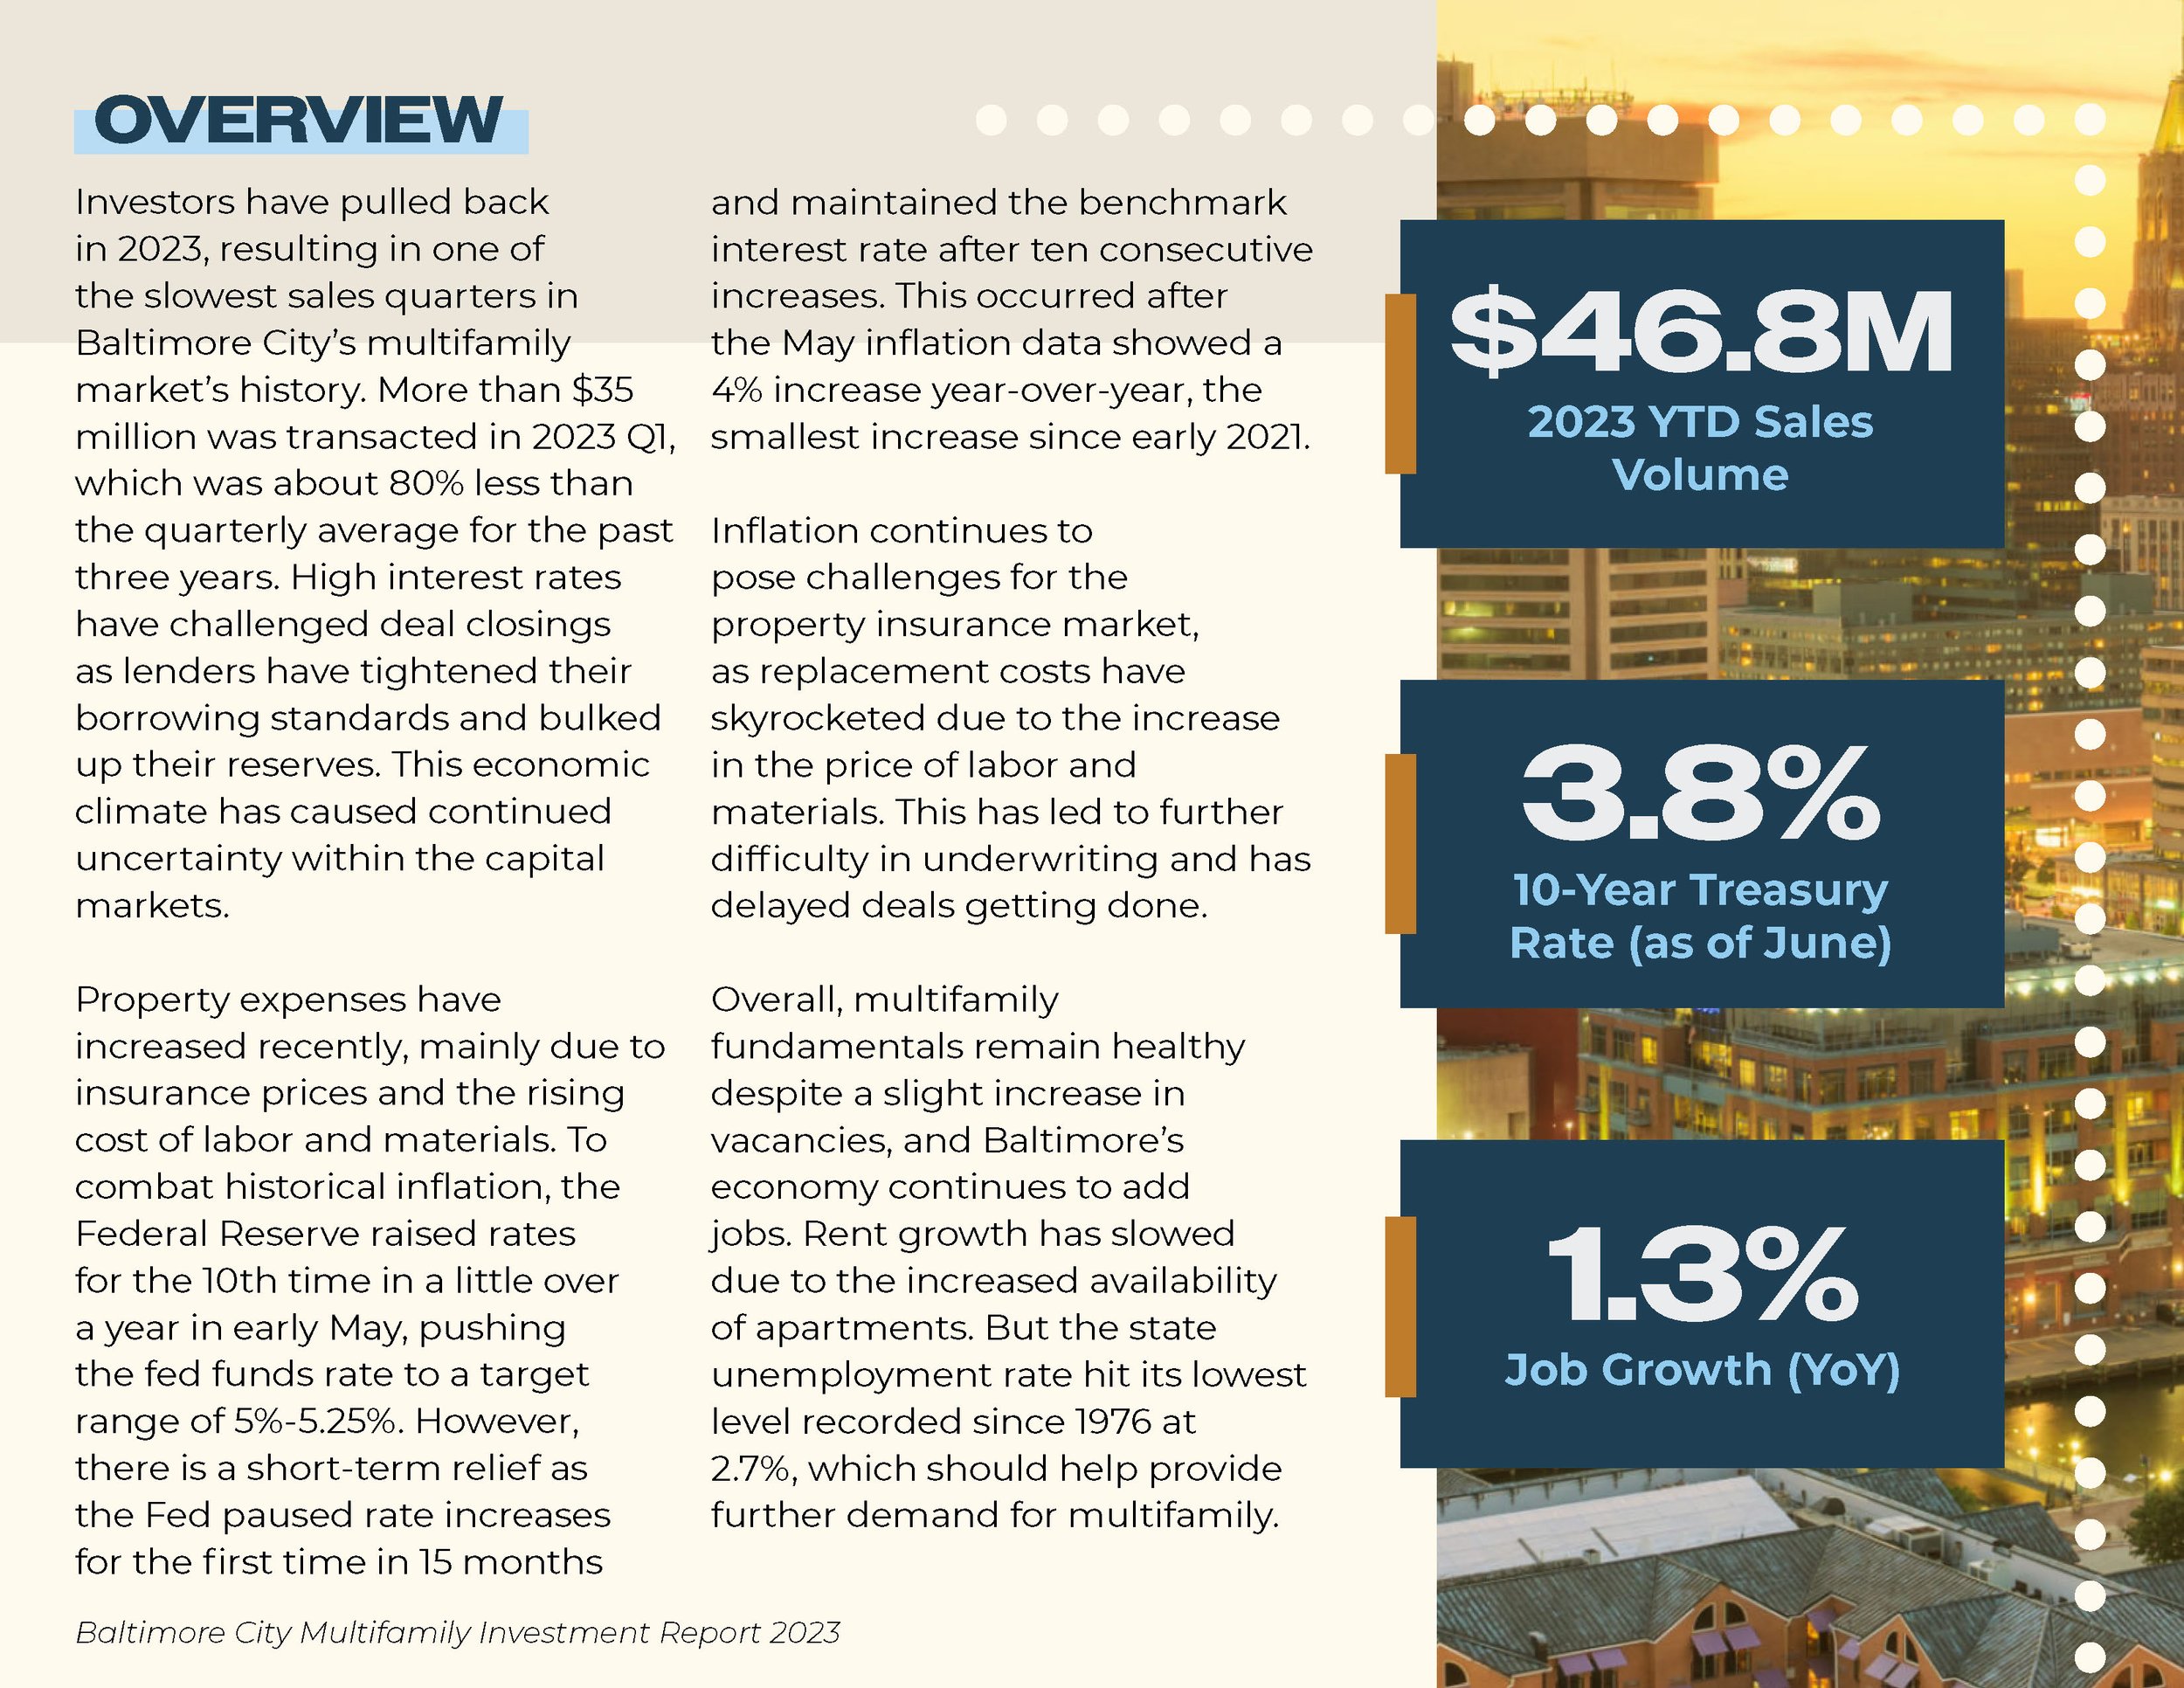 Multifamily investment report-v4_Page_2.jpg